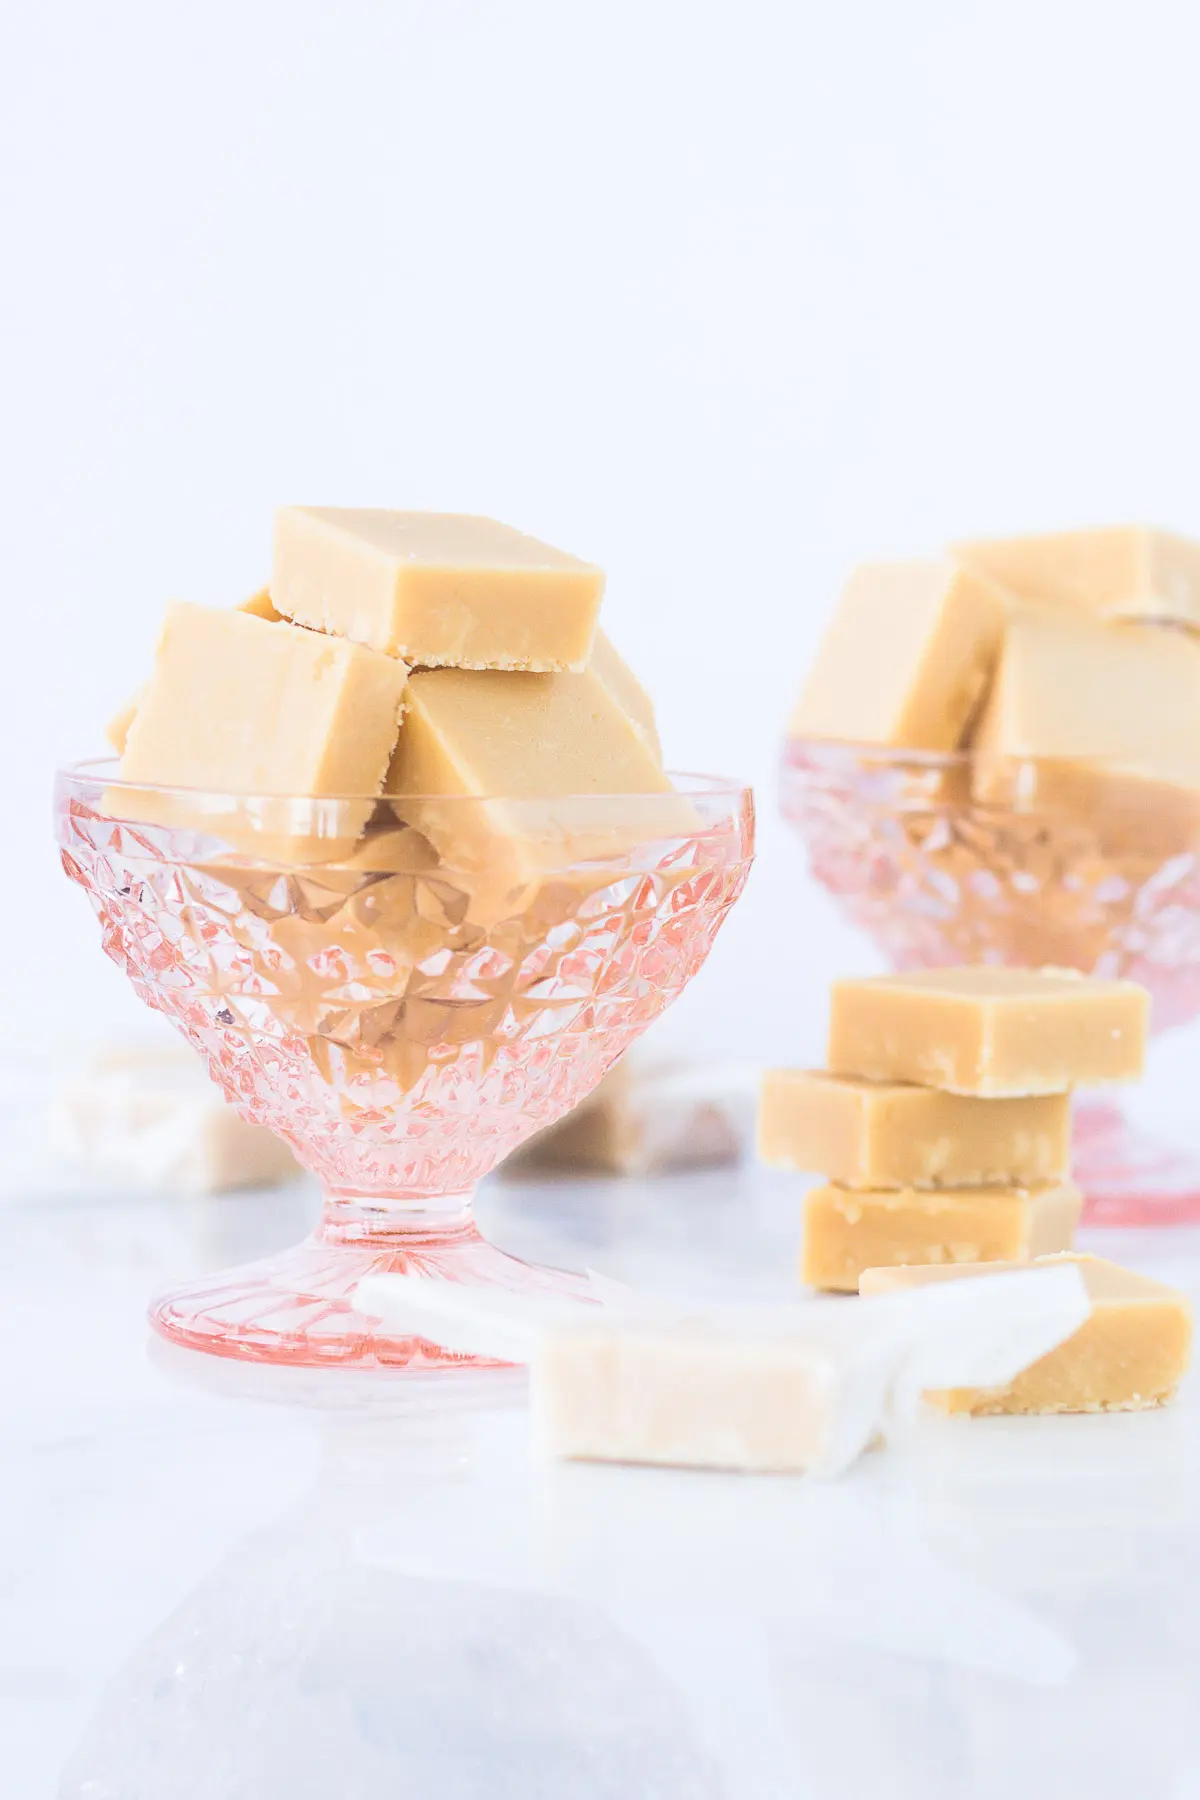 Fudge in a small pink bowl.